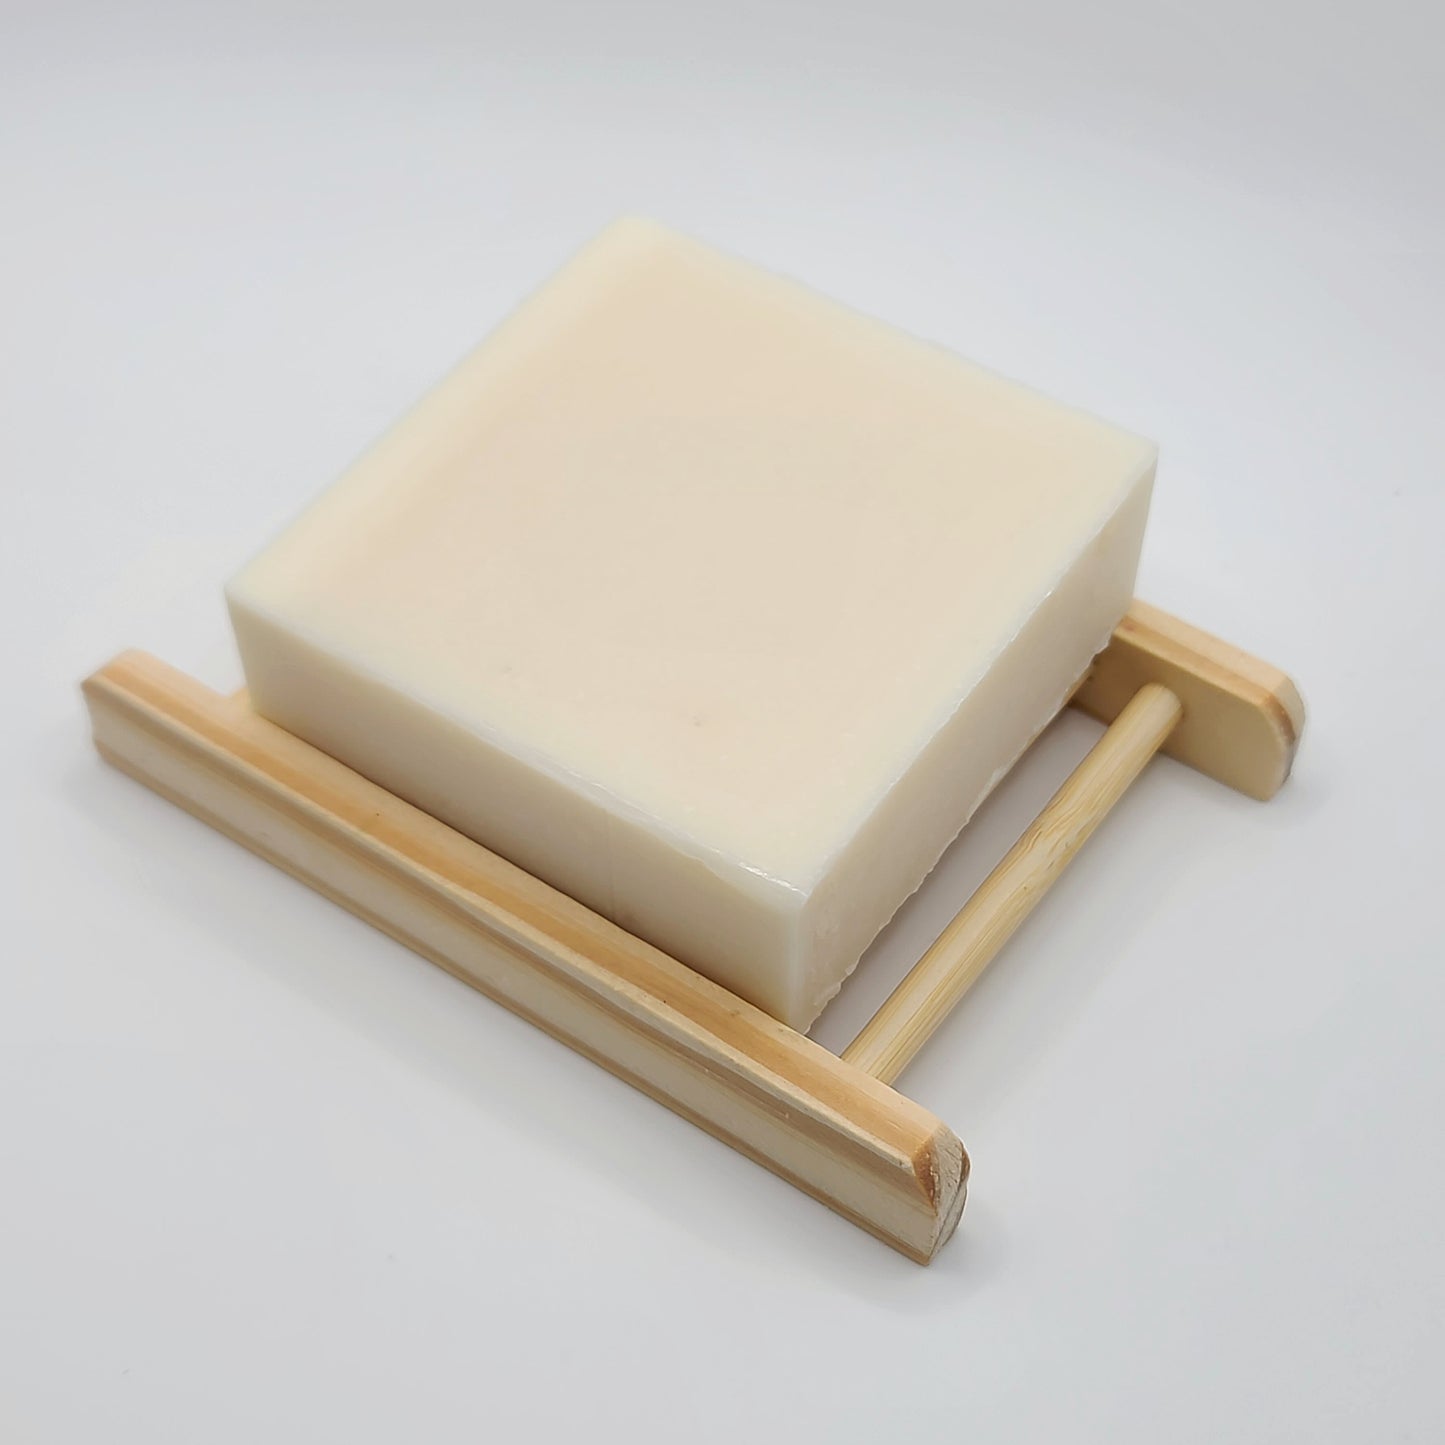 Scentless Soap